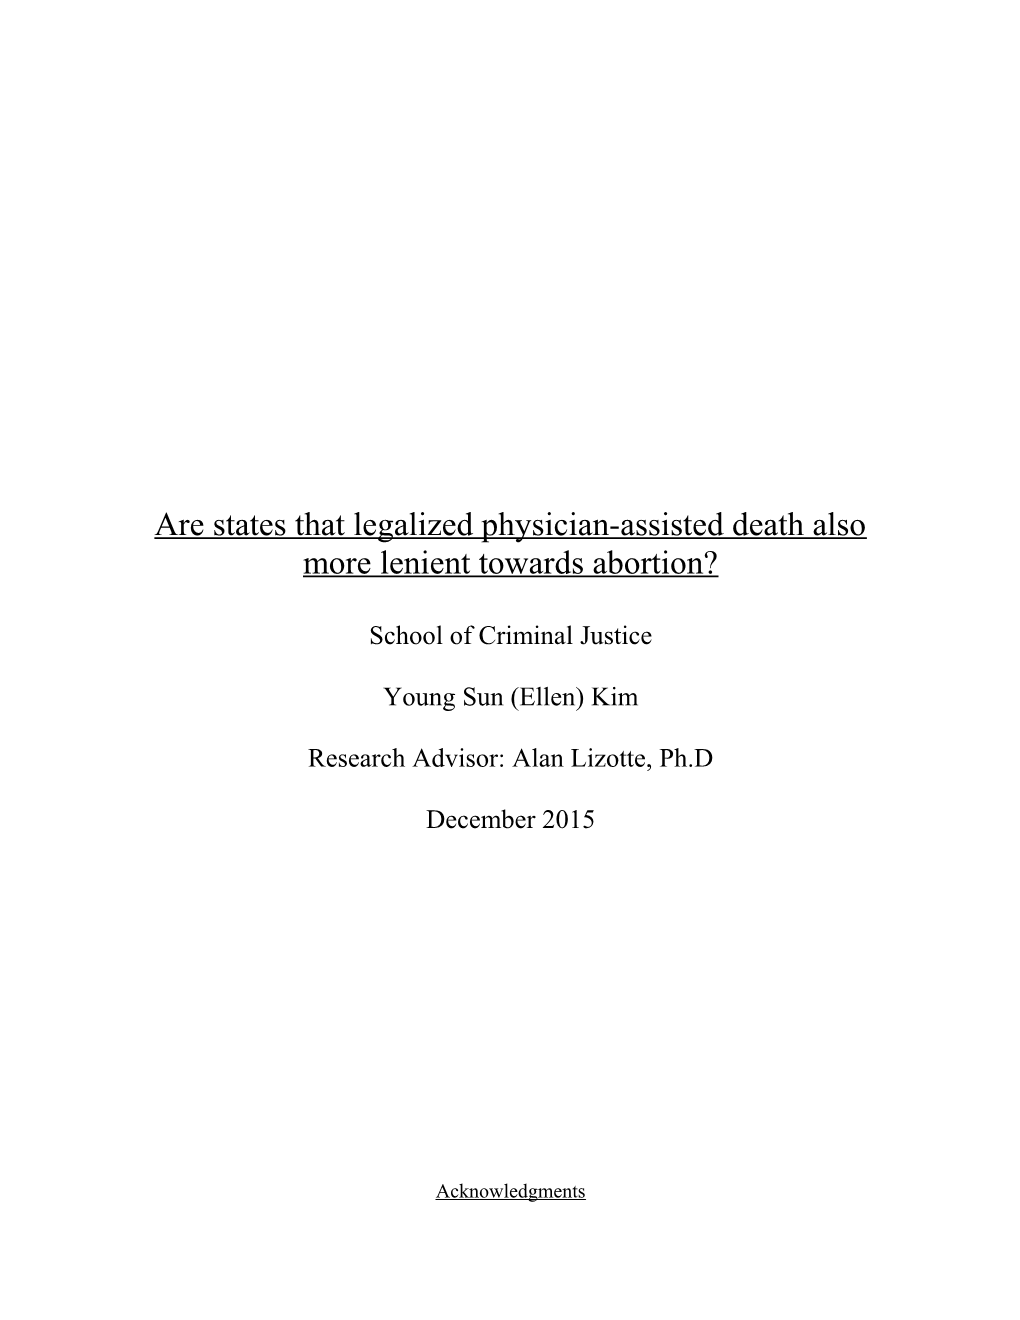 Are States That Legalized Physician-Assisted Death Also More Lenient Towards Abortion?